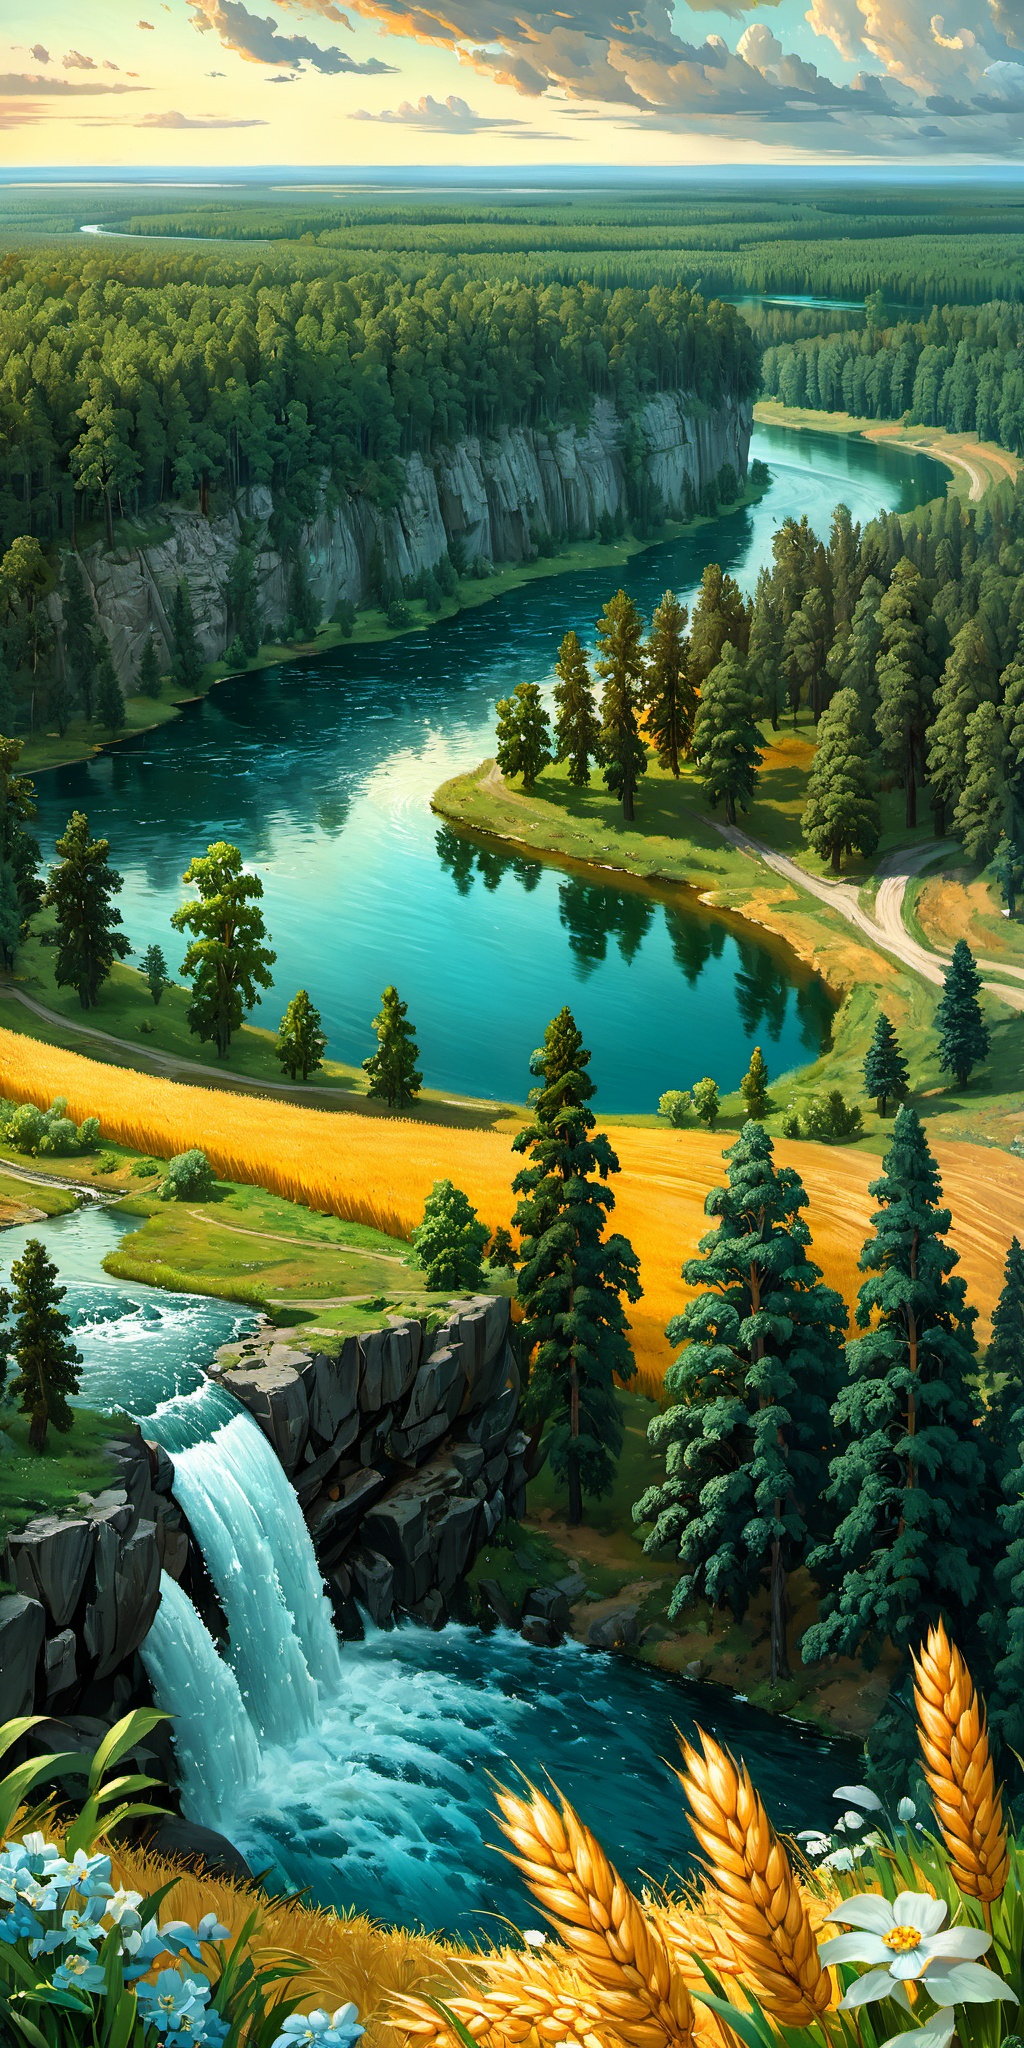 Wheat, fields,ivan Shishkin,nature,trees,forest,water fall,sky,clouds,rock,lake,cloud,scenery,leafs,flowers,mountain at far,river,from above,